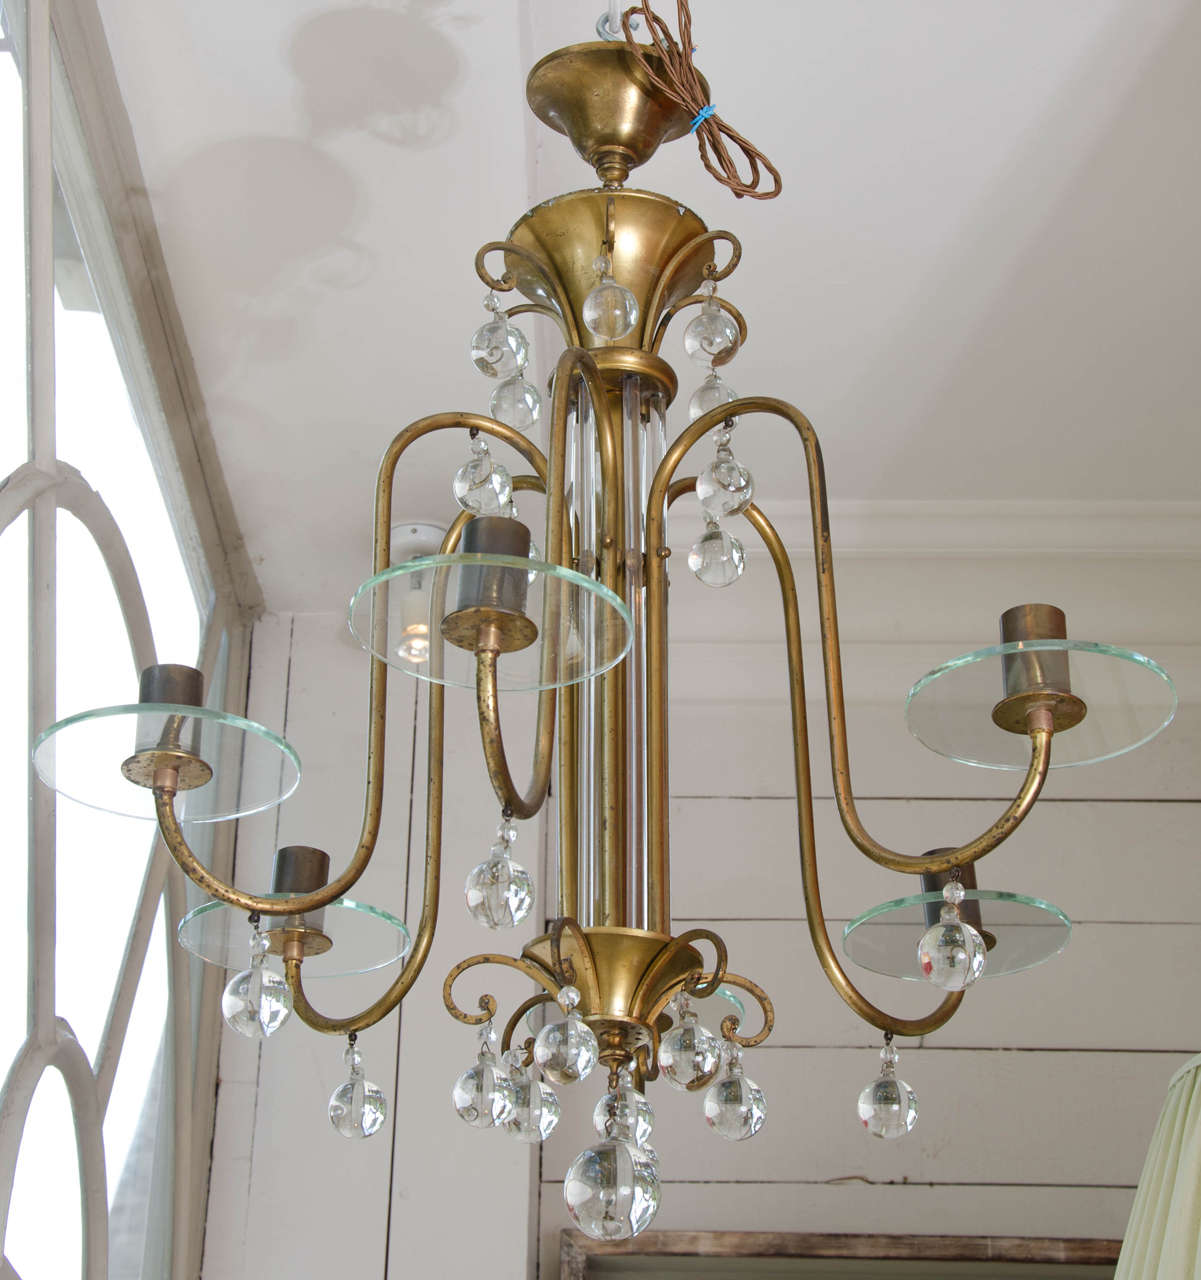 A mid 20th century six light French ormolu and glass balled chandelier.